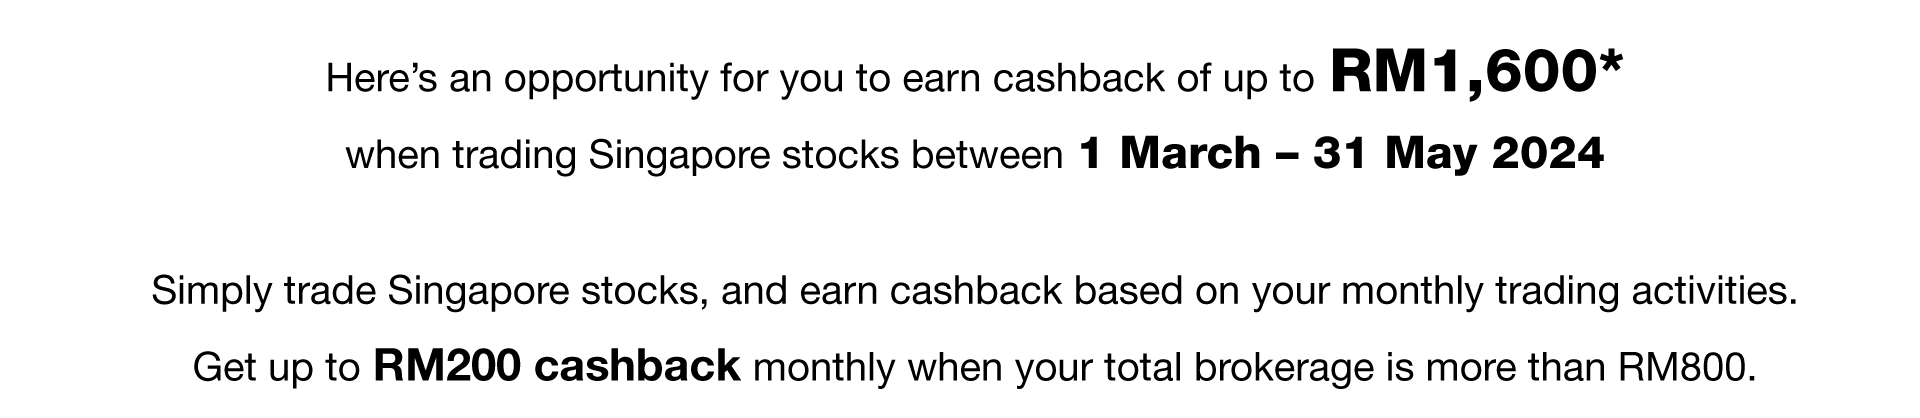 Here’s an opportunity for you to earn cashback of up to RM1,600* when trading Singapore stocks between 1 March – 31 May 2024